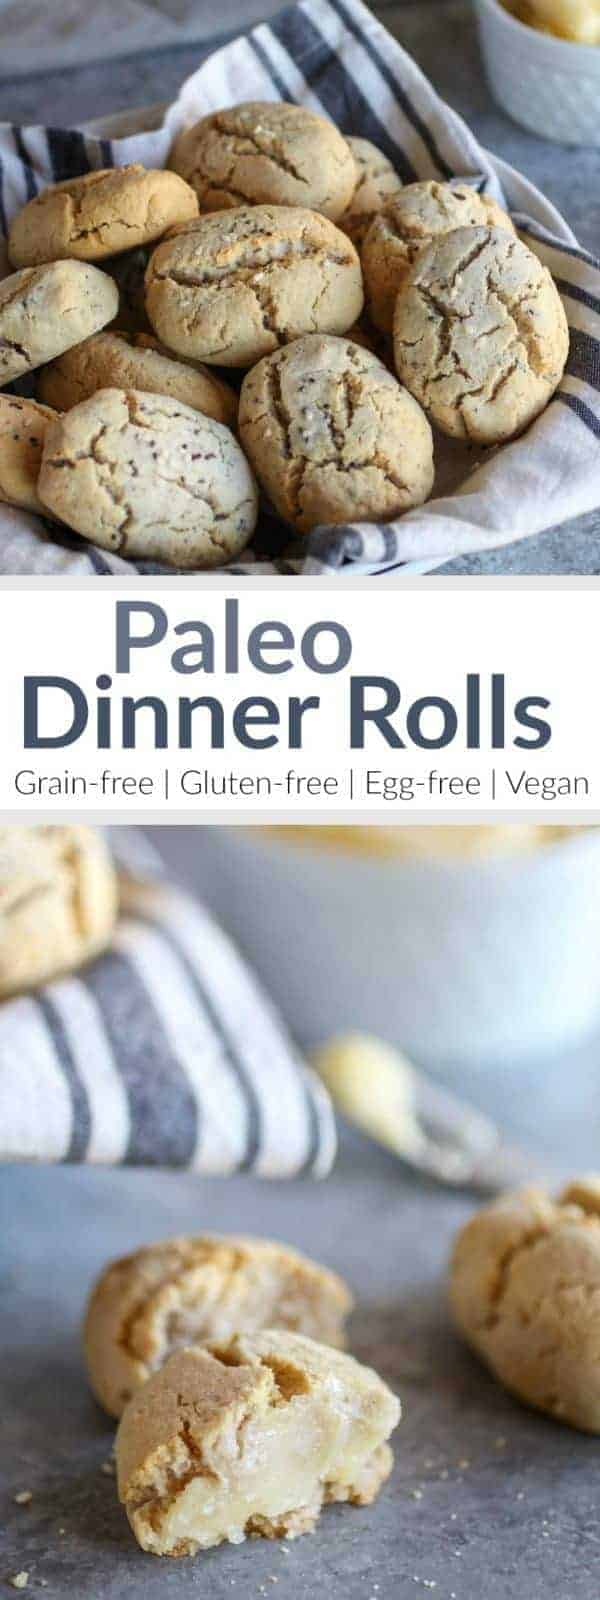 An allergy-friendly, paleo dinner roll recipe for ALL to enjoy | These Paleo Dinner Rolls are grain-free, gluten-free, egg-free, vegan-option and nut-free option | therealfoodrds.com